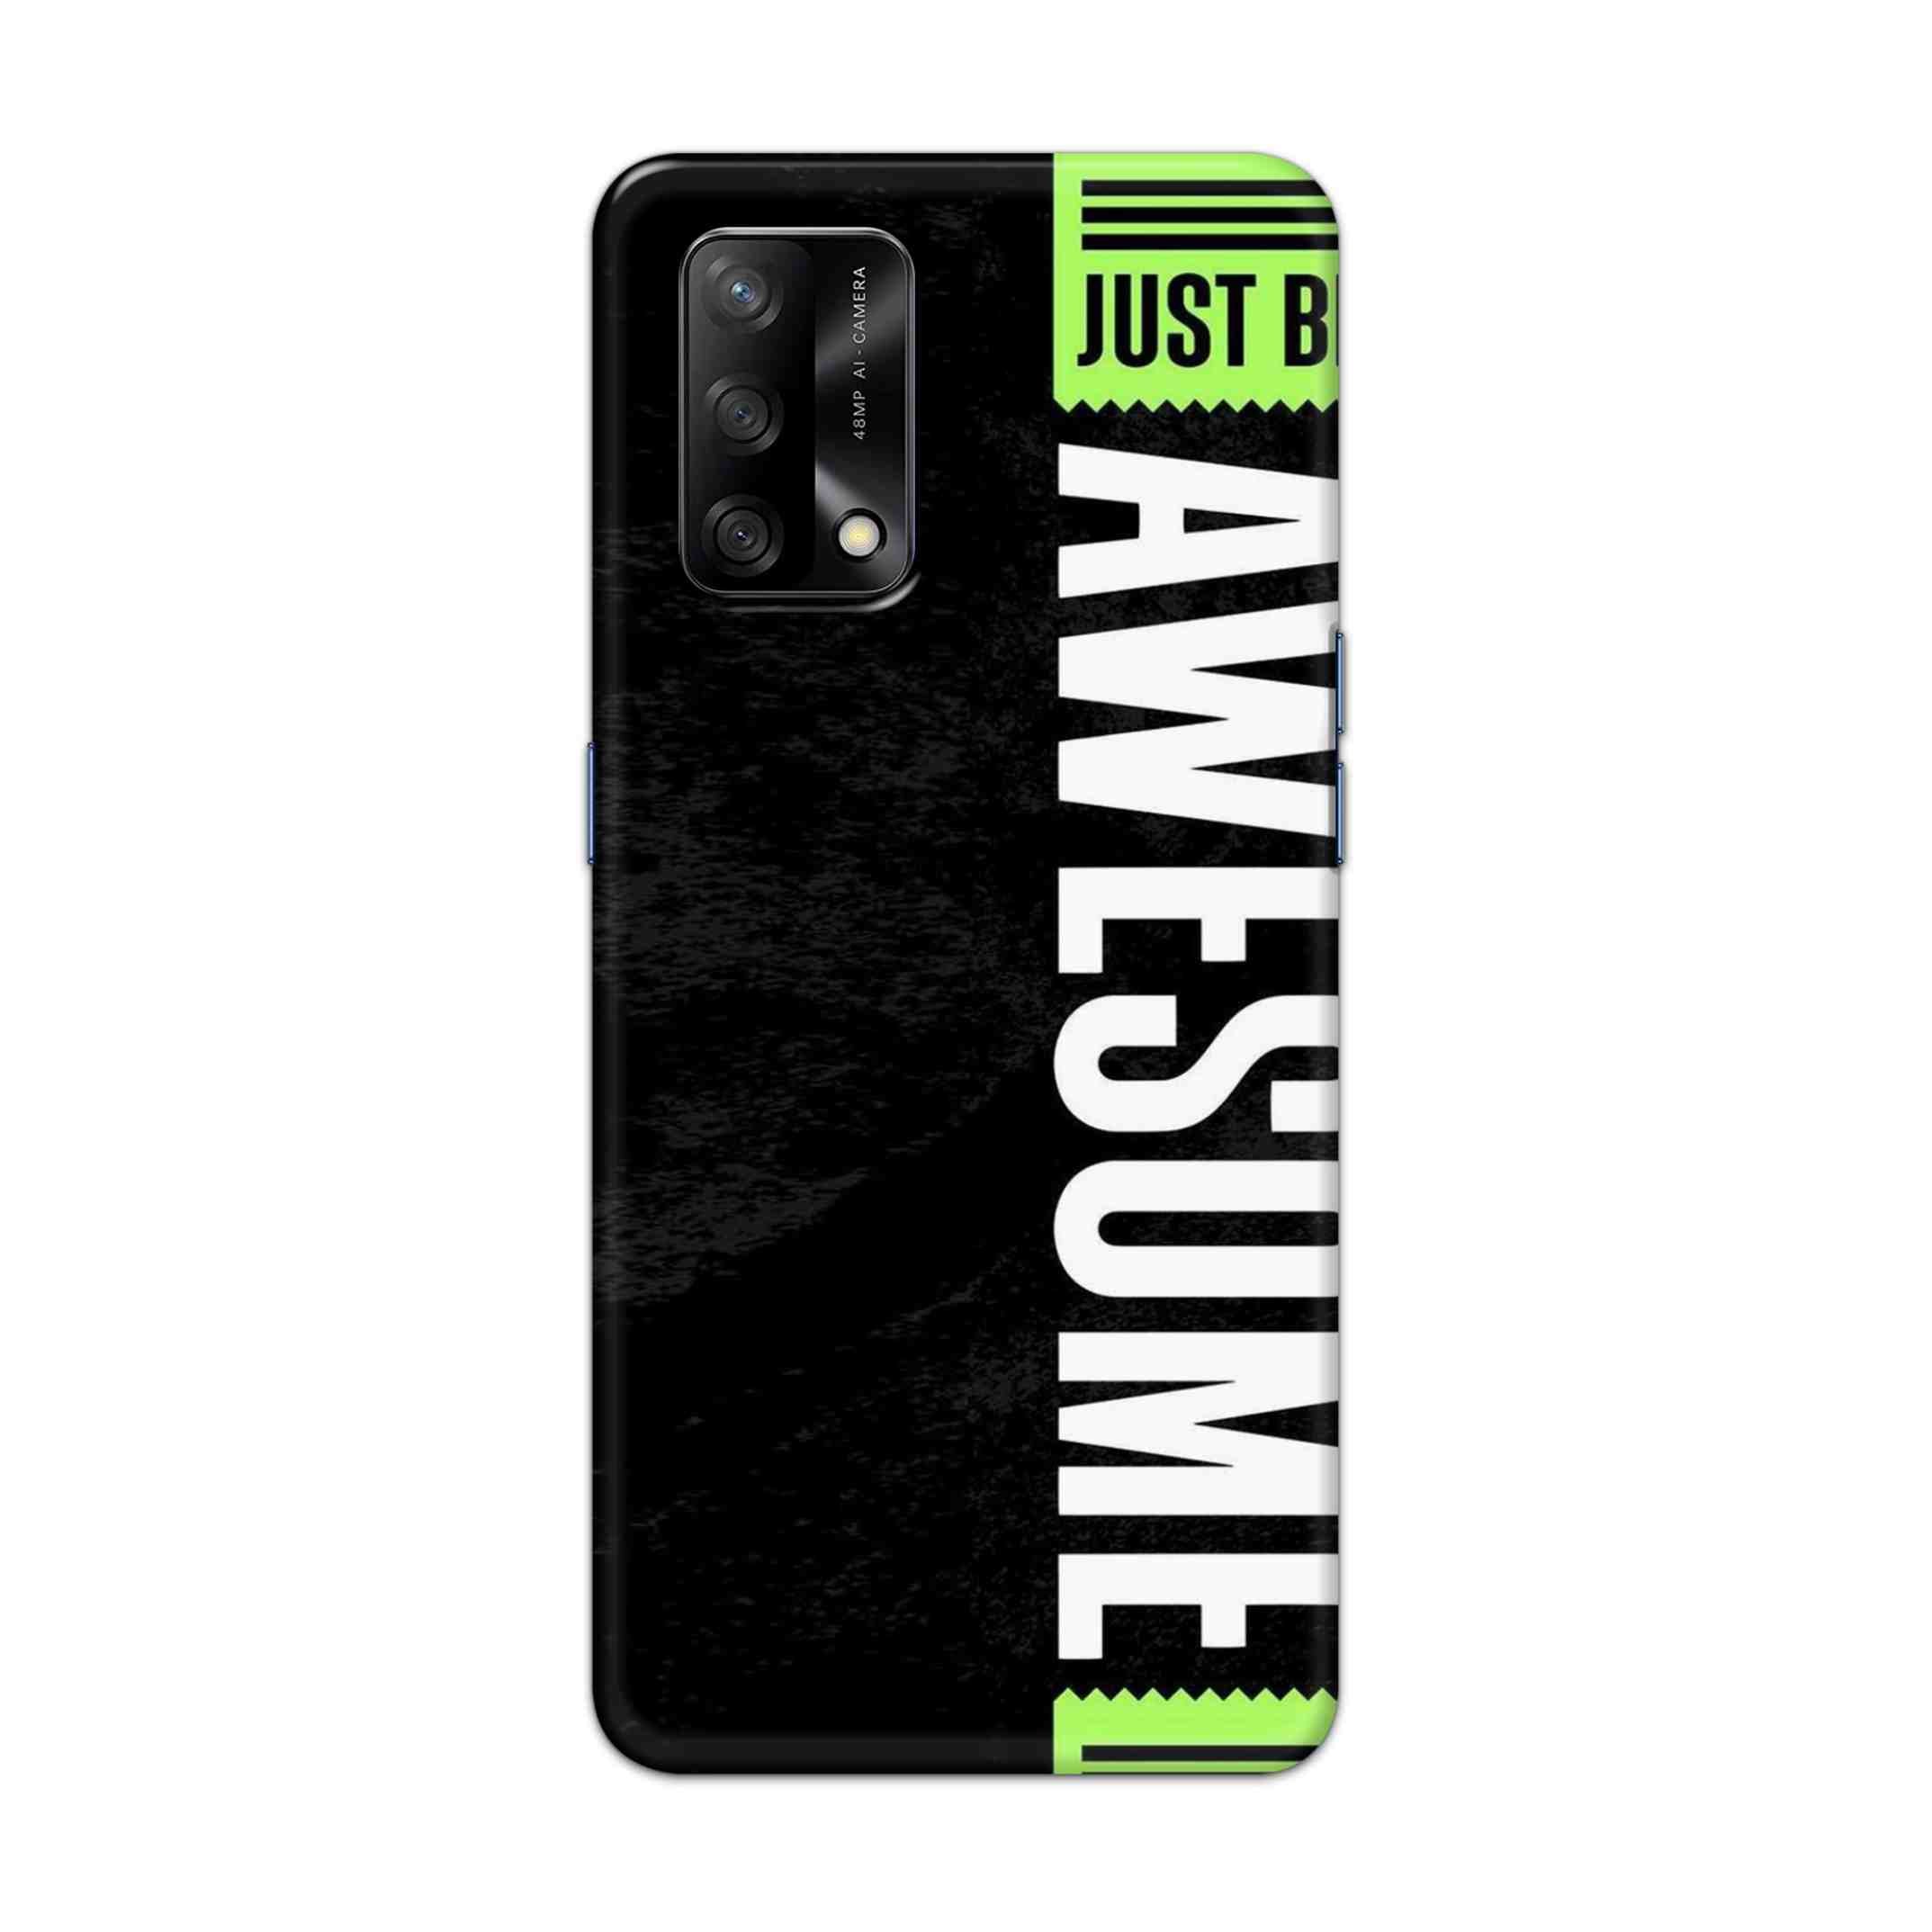 Buy Awesome Street Hard Back Mobile Phone Case Cover For Oppo F19 Online